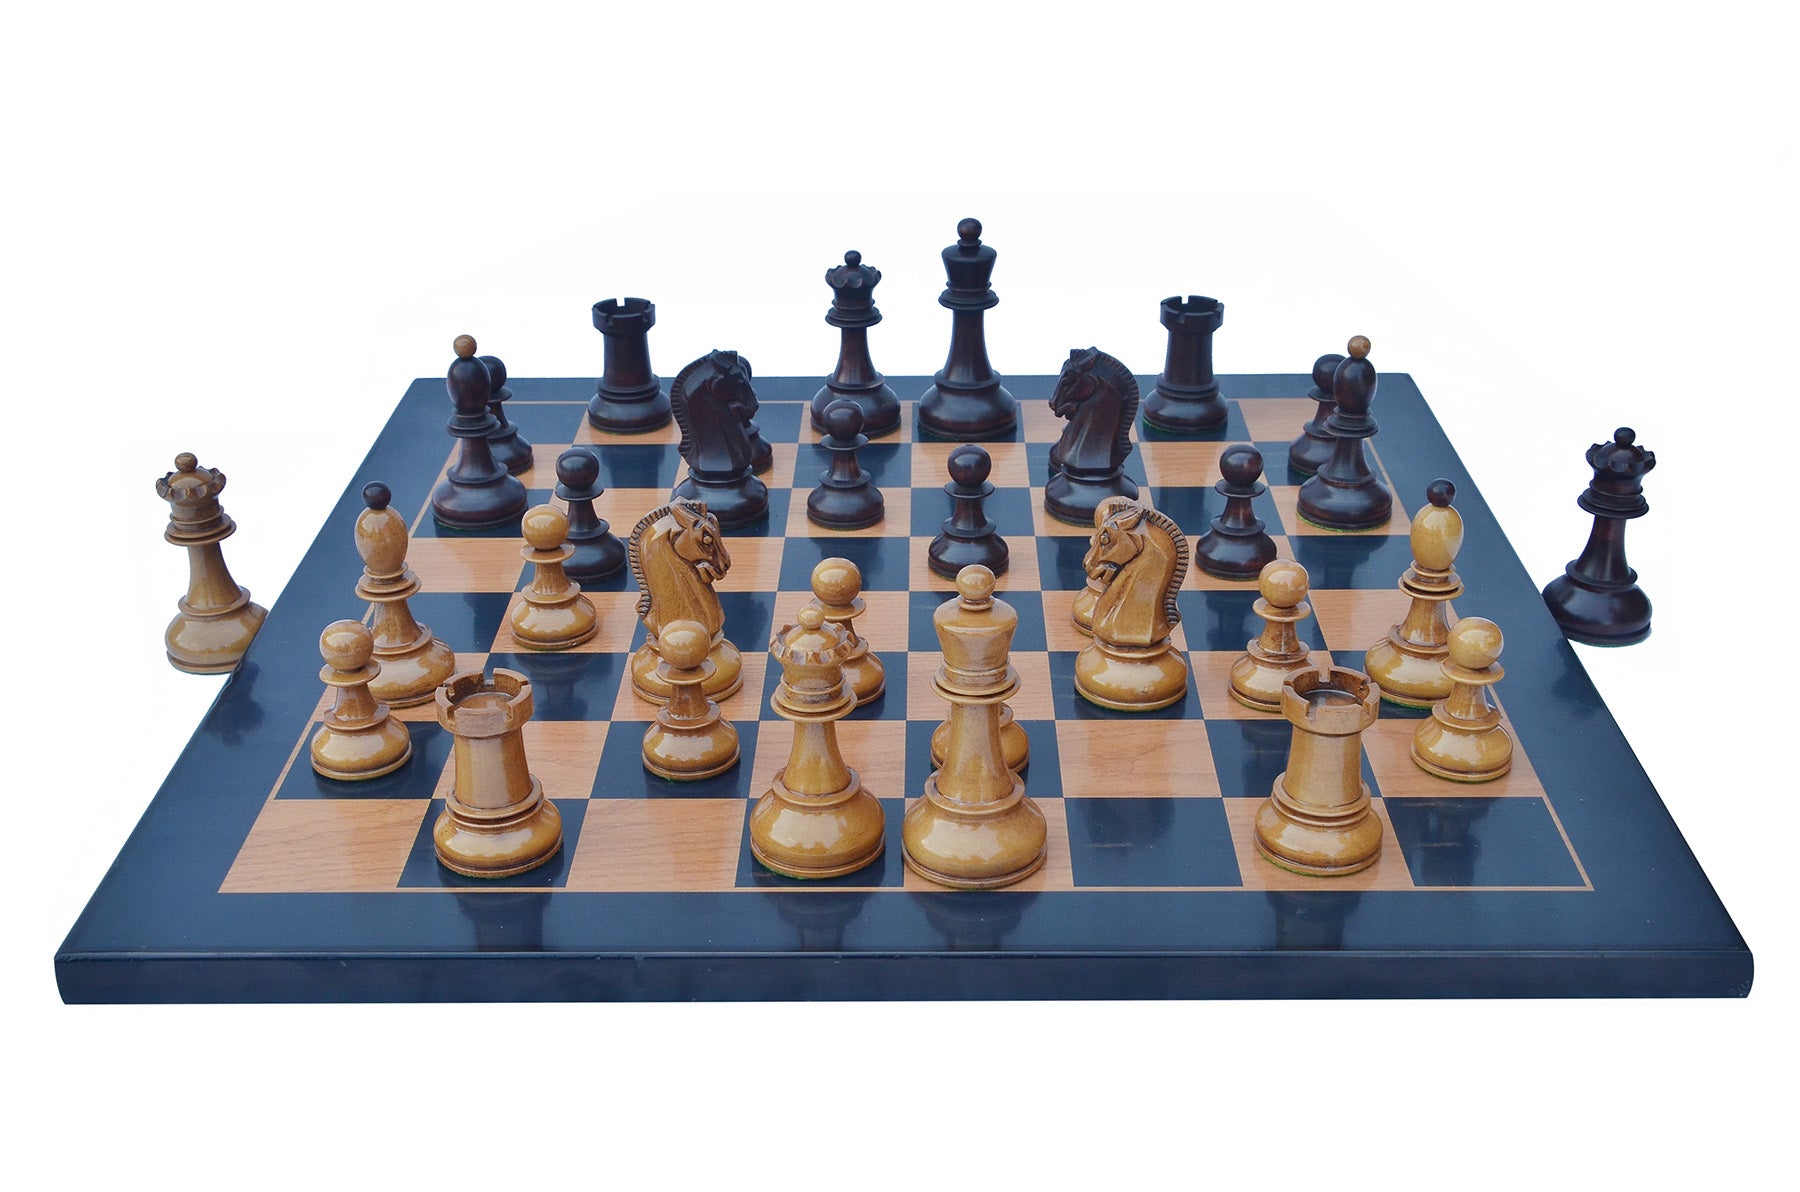 Dubrovink Series 1950 Vintage Reproduction 3.75" Distressed/Mahogany Stained Boxwood Chess Set